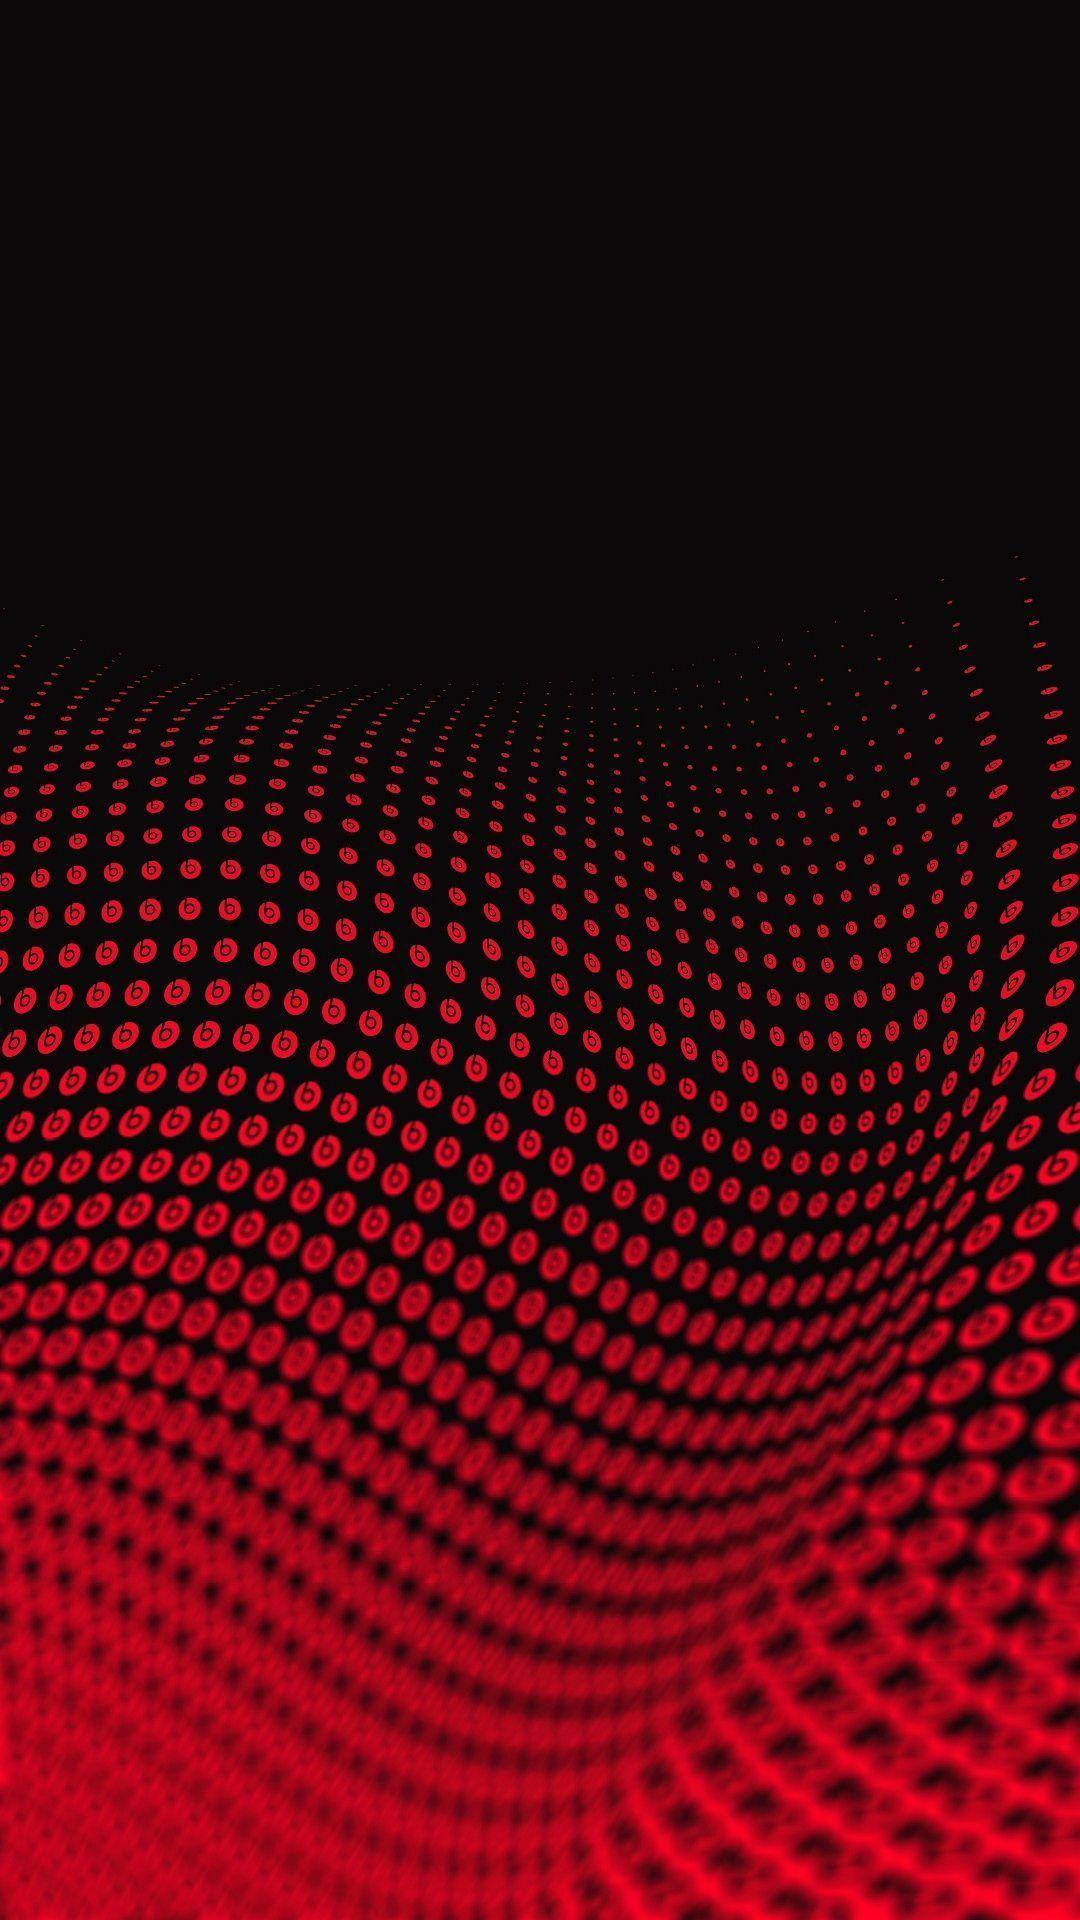 Wallpaper Full HD 1080 X 1920 Smartphone Red Wave 3D Abstract